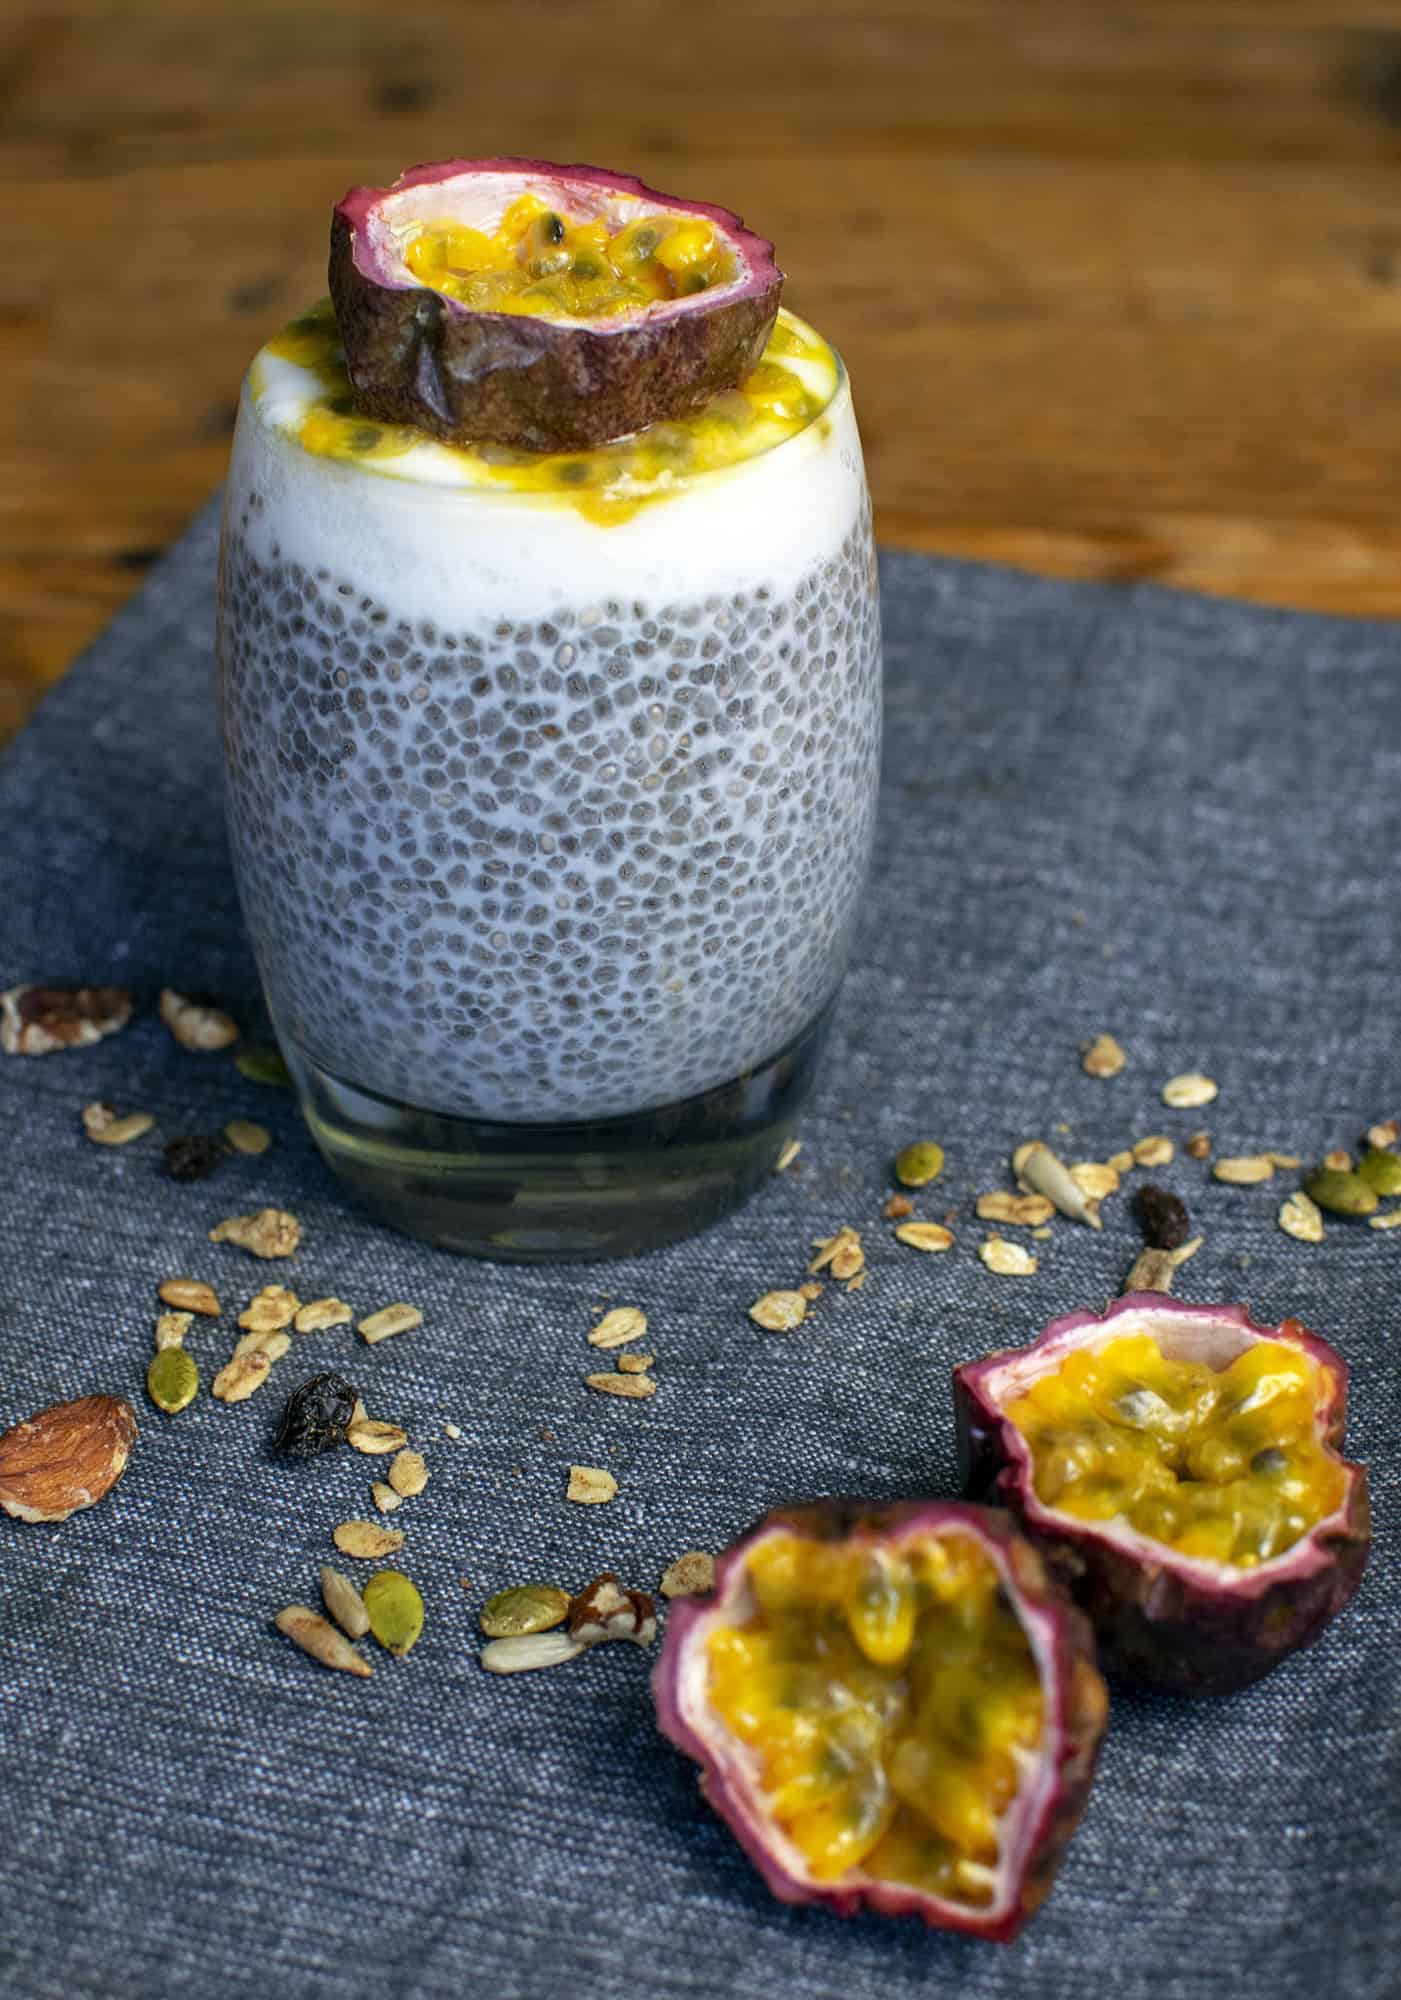 One passionfruit cut in half is in the foreground , with a glass full of chia pudding in the background, topped with half a passionfruit